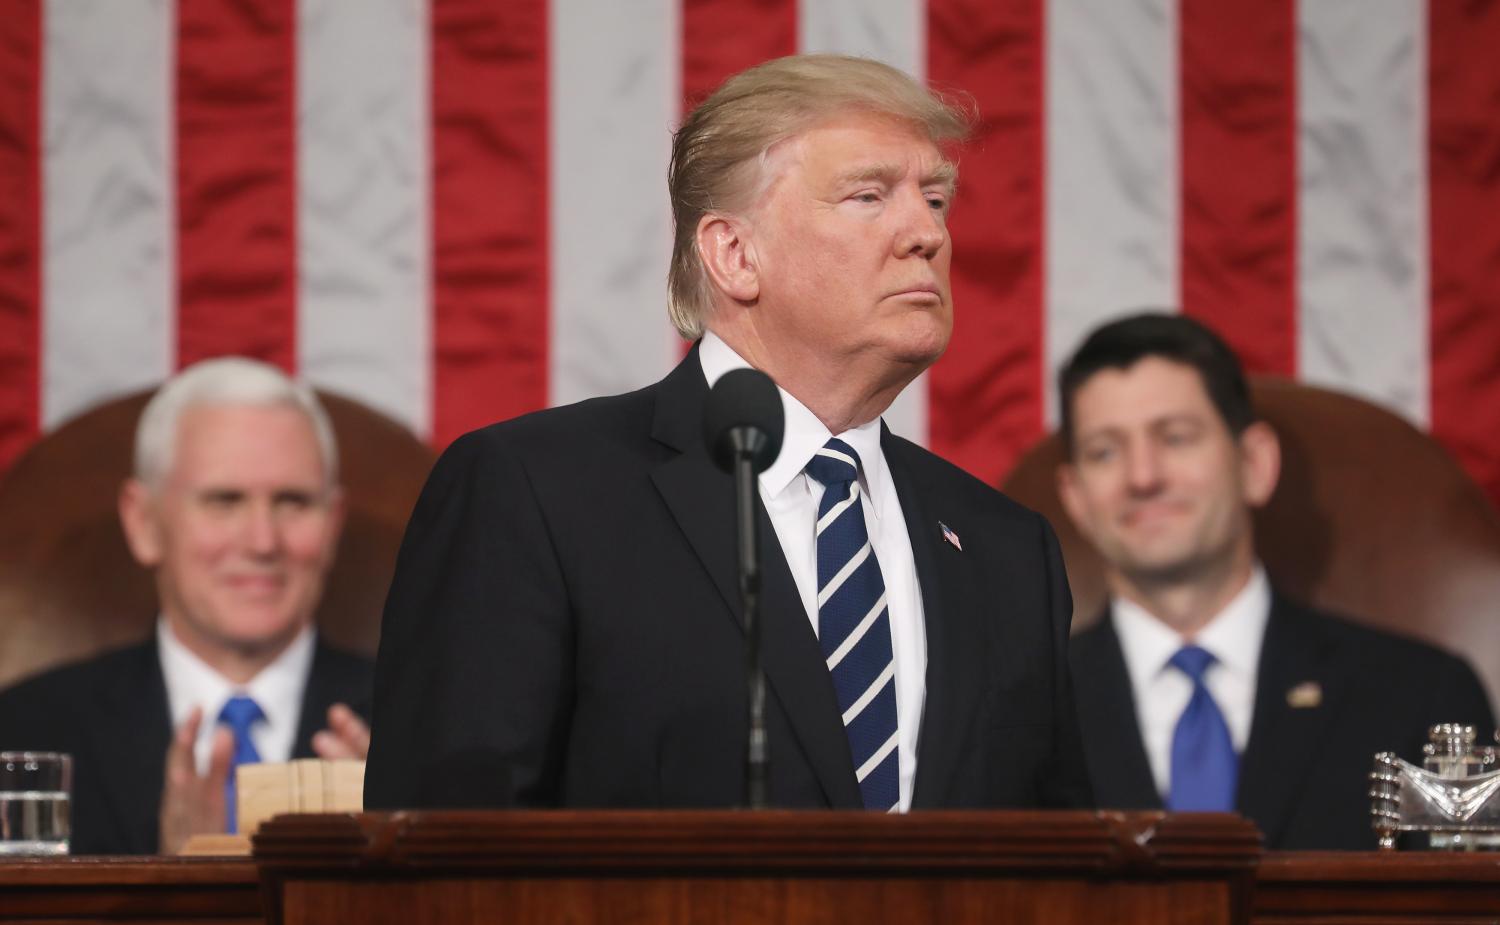 US President Trump addresses Joint Session of Congress in Washington